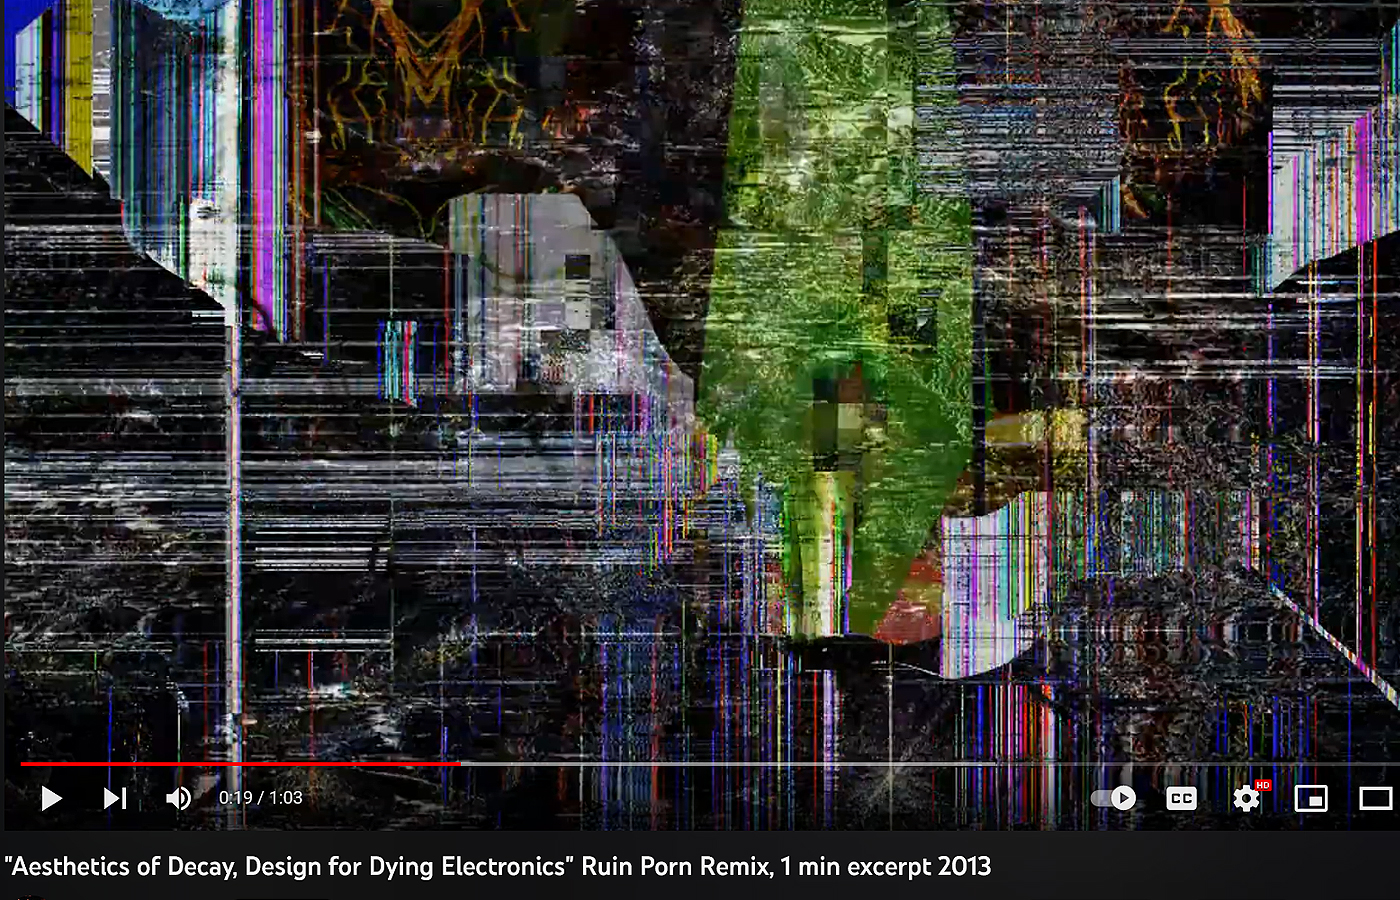 "Aesthetics of Decay, Design for Dying Electronics" Ruin Porn Remix, 1 min excerpt 2013